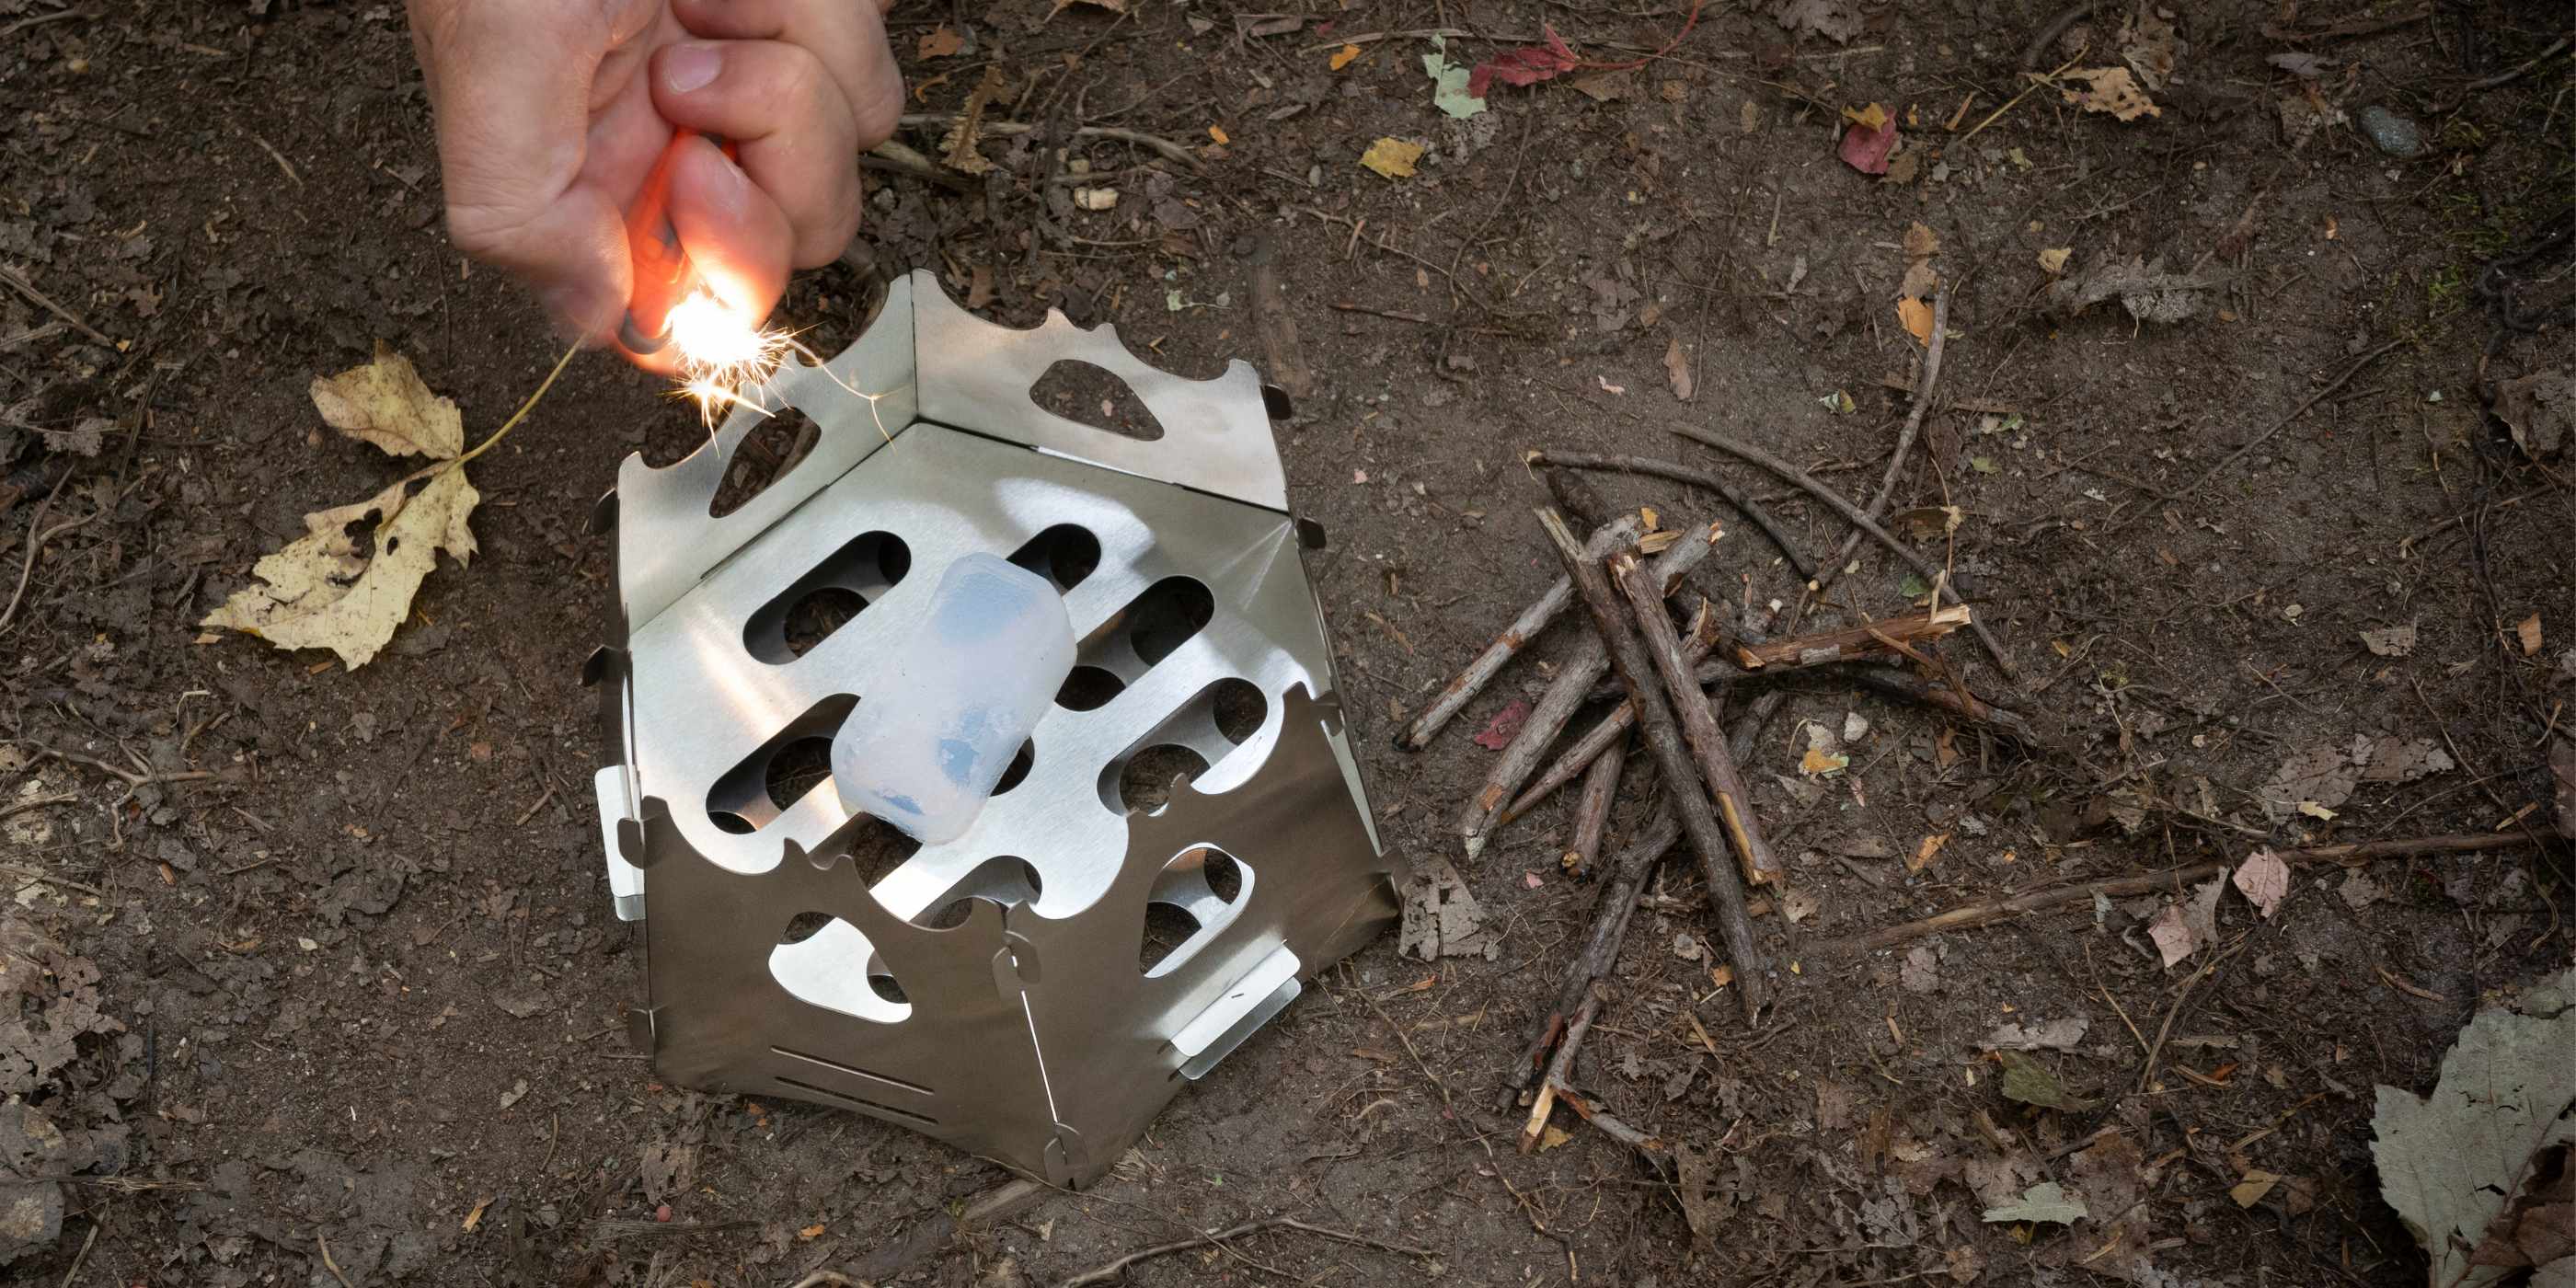 Person Lighting SOL Fire Cubes in Backpacking Stove on Dirt Ground